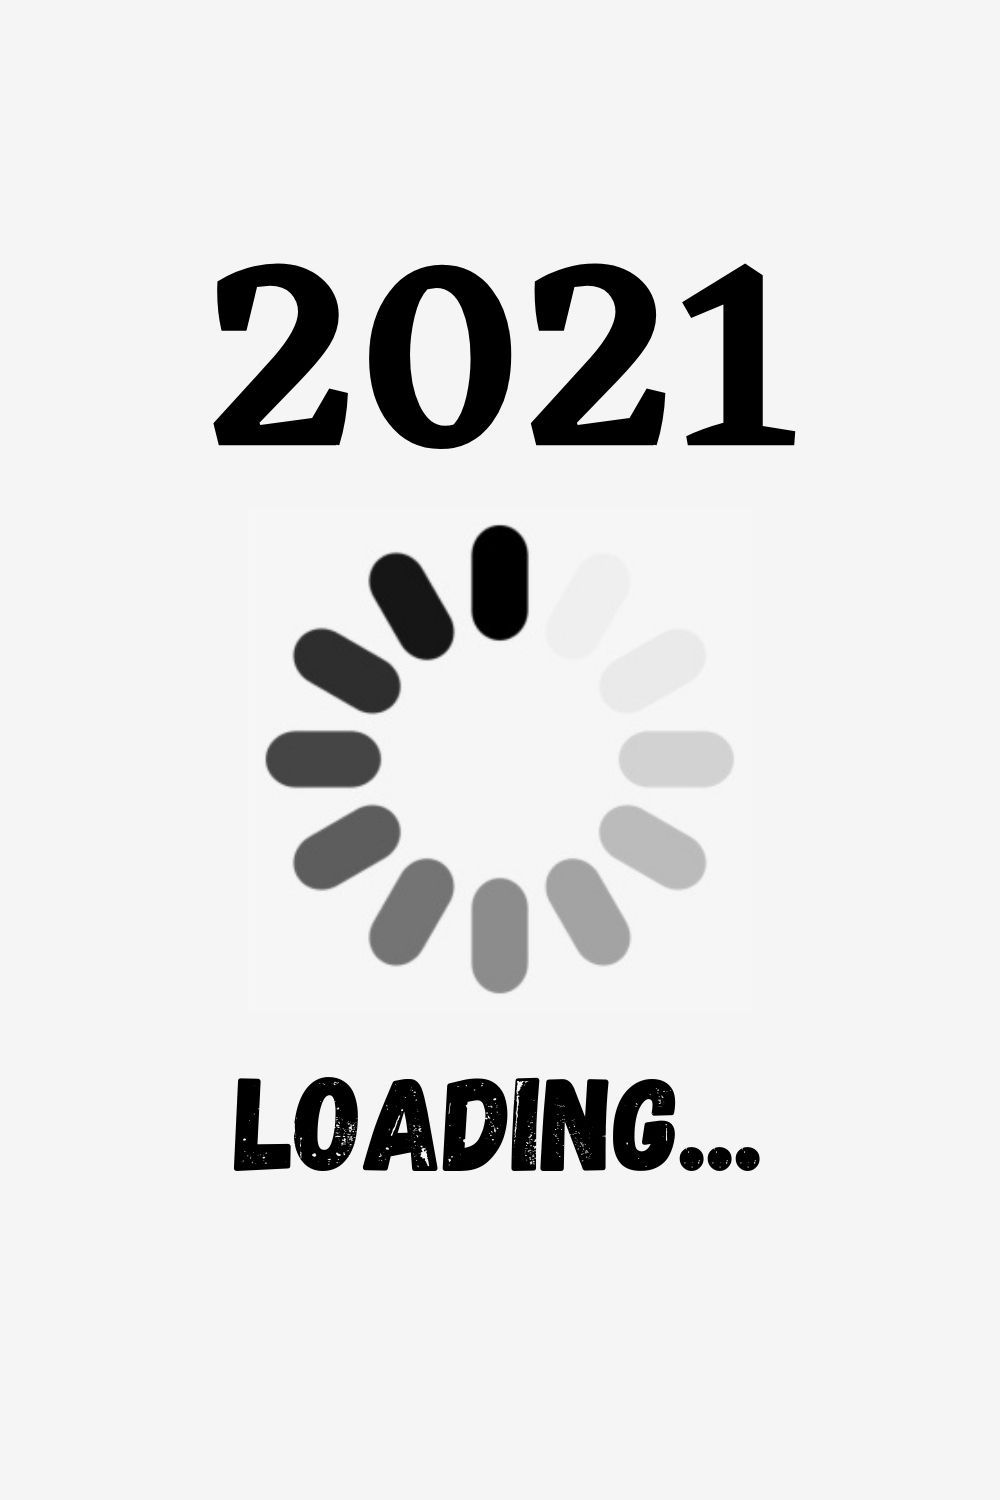 Loading 2021 Greeting Wallpapers